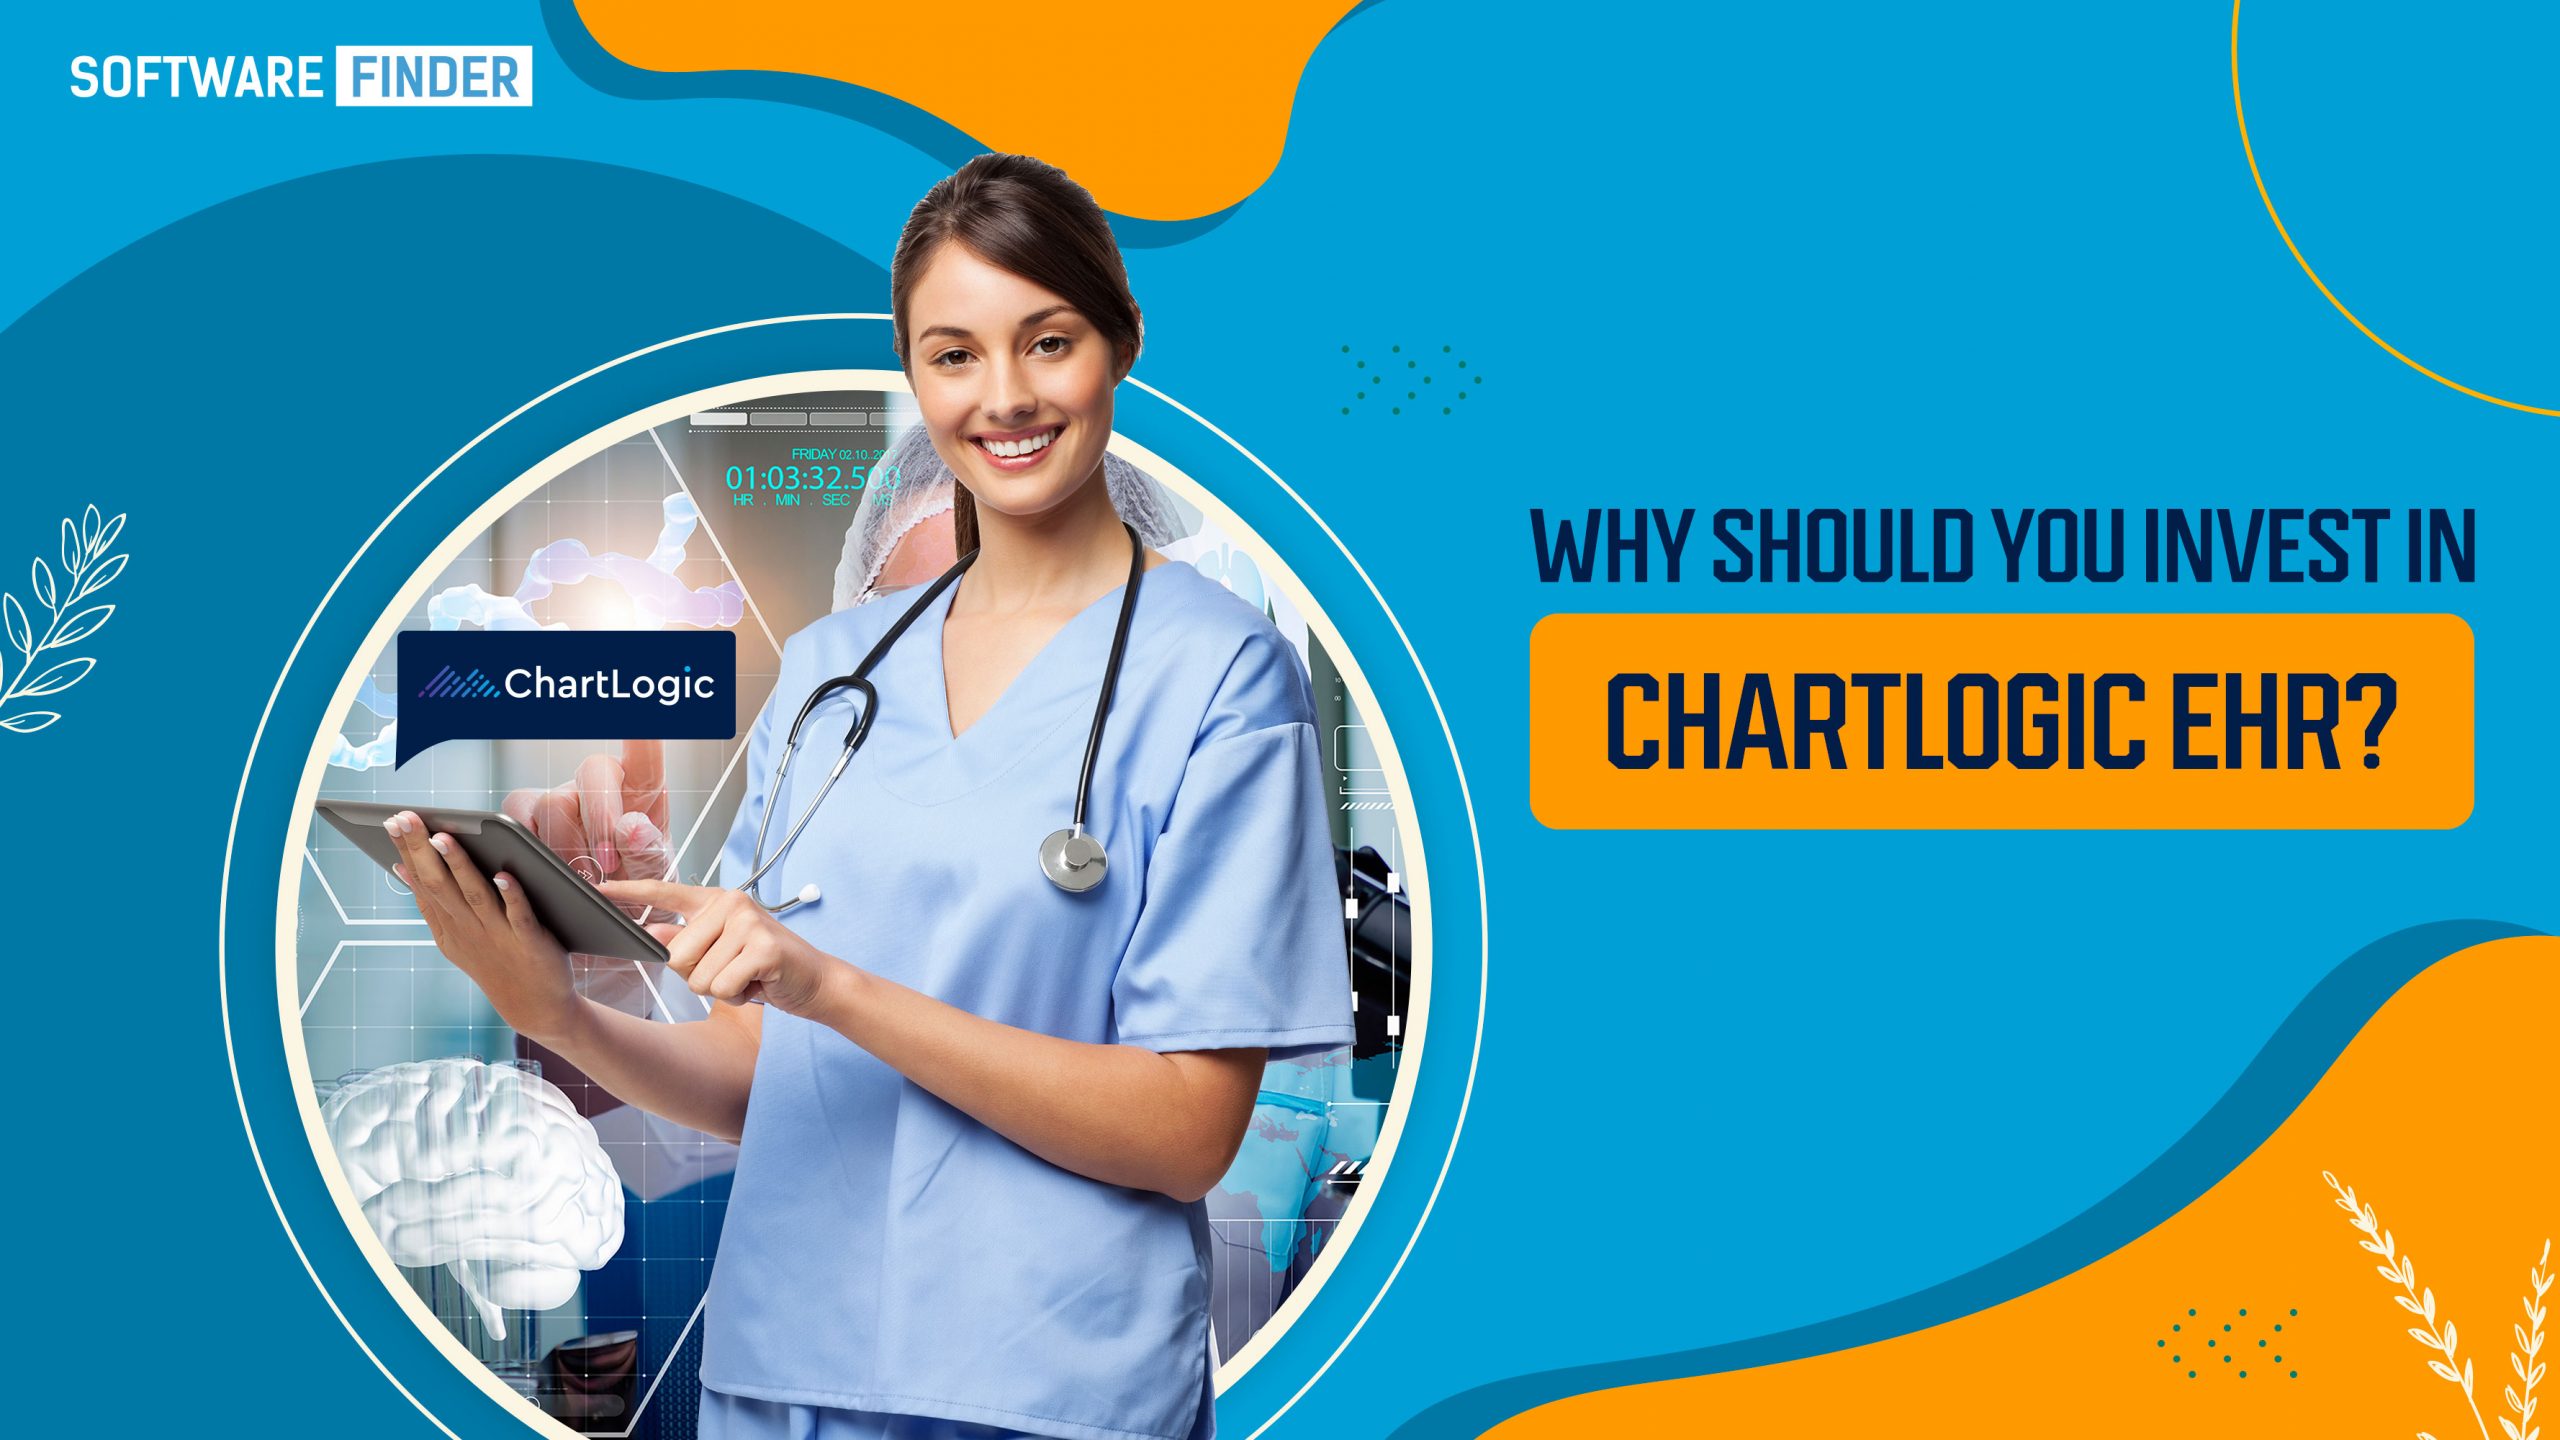 Why Should You Invest in ChartLogic EHR?